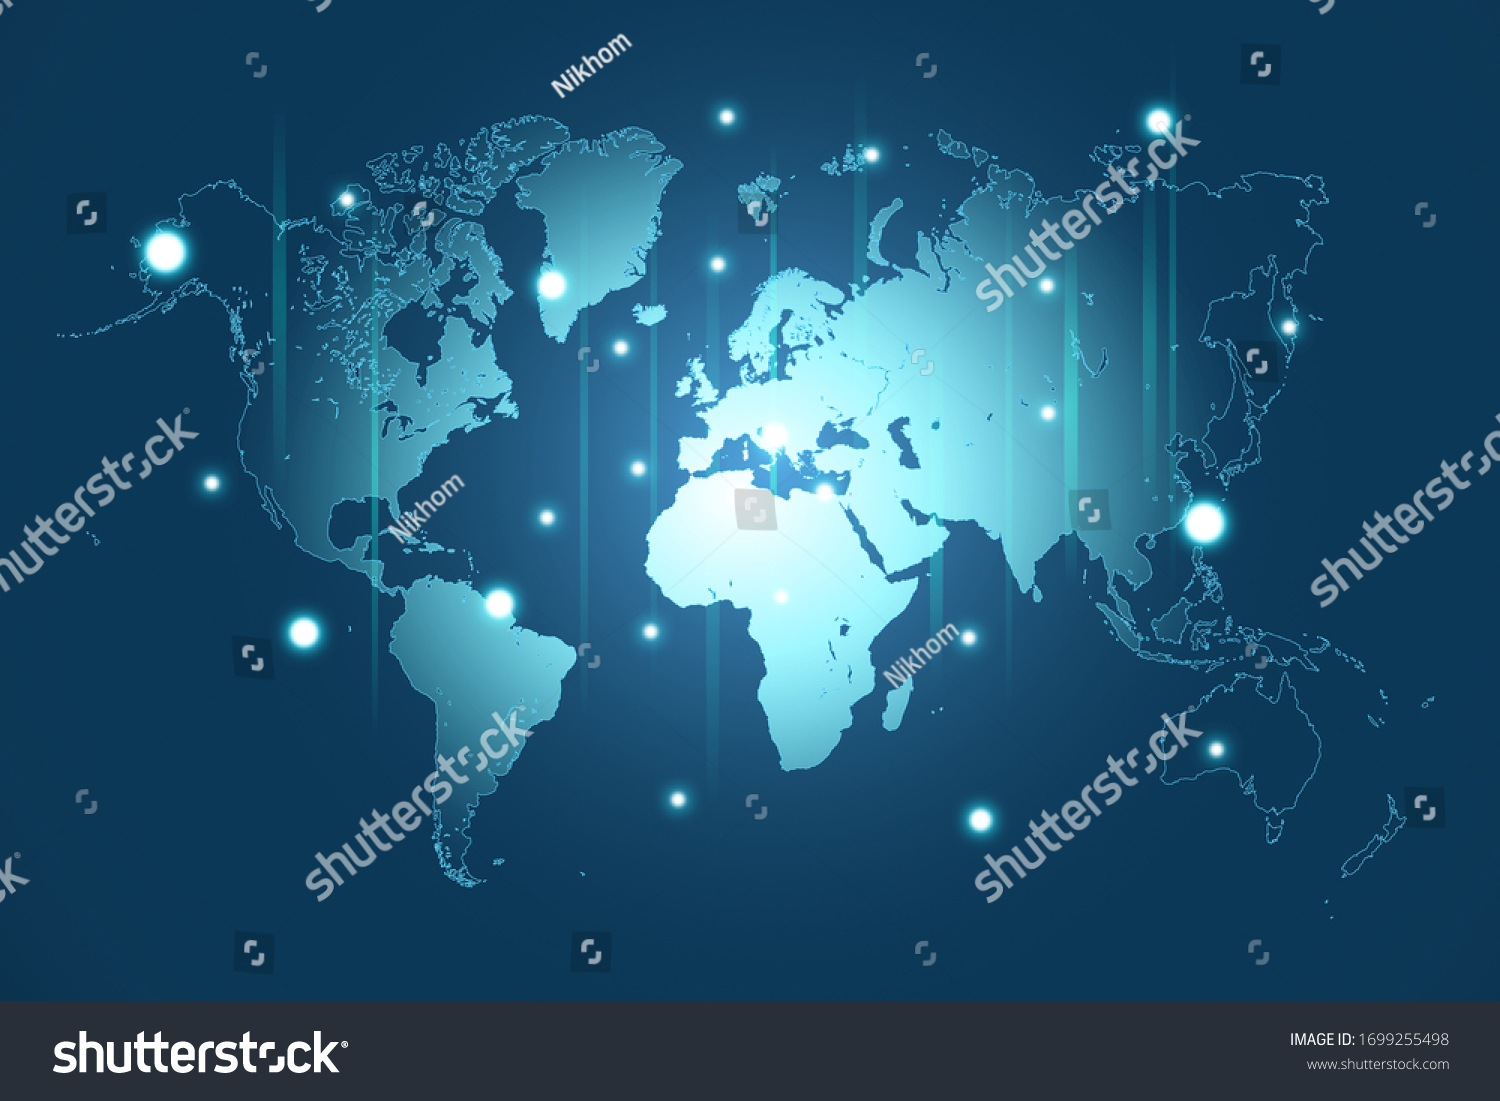 World map background with aurora light and bubble light. illustration. #1699255498